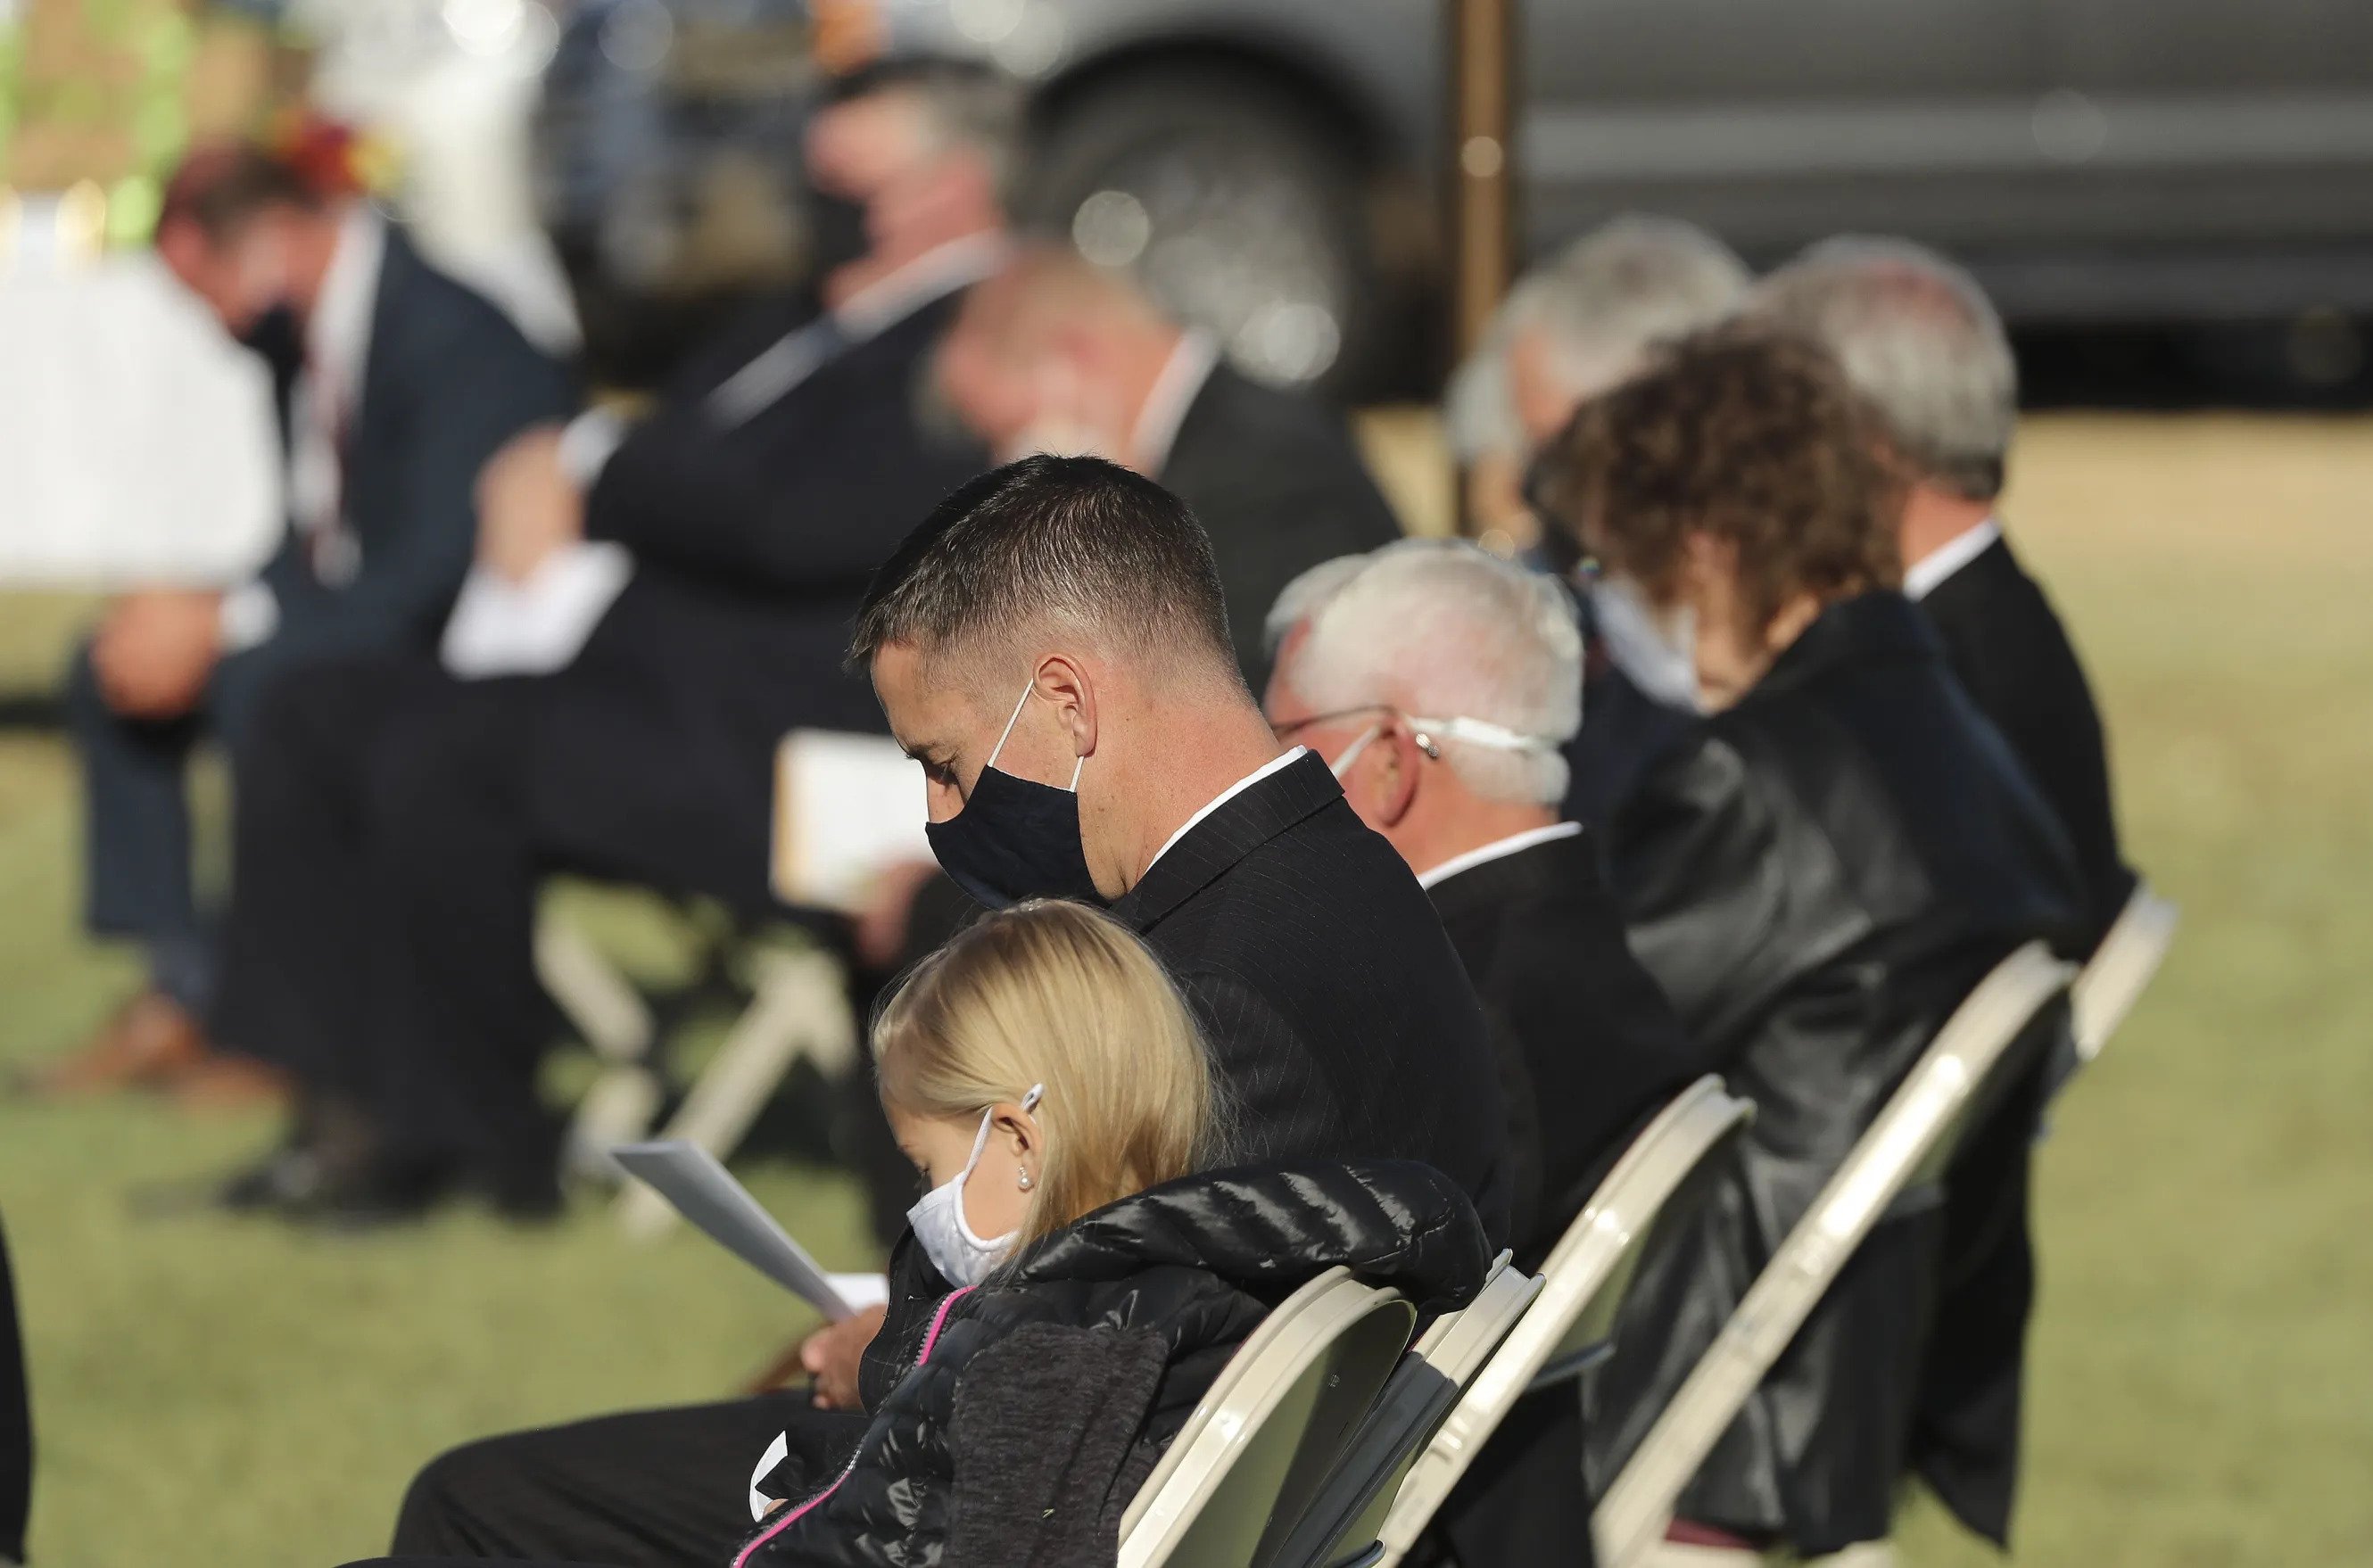 A row of people in Sunday best, sitting on chairs outside and bowing their heads in prayer.